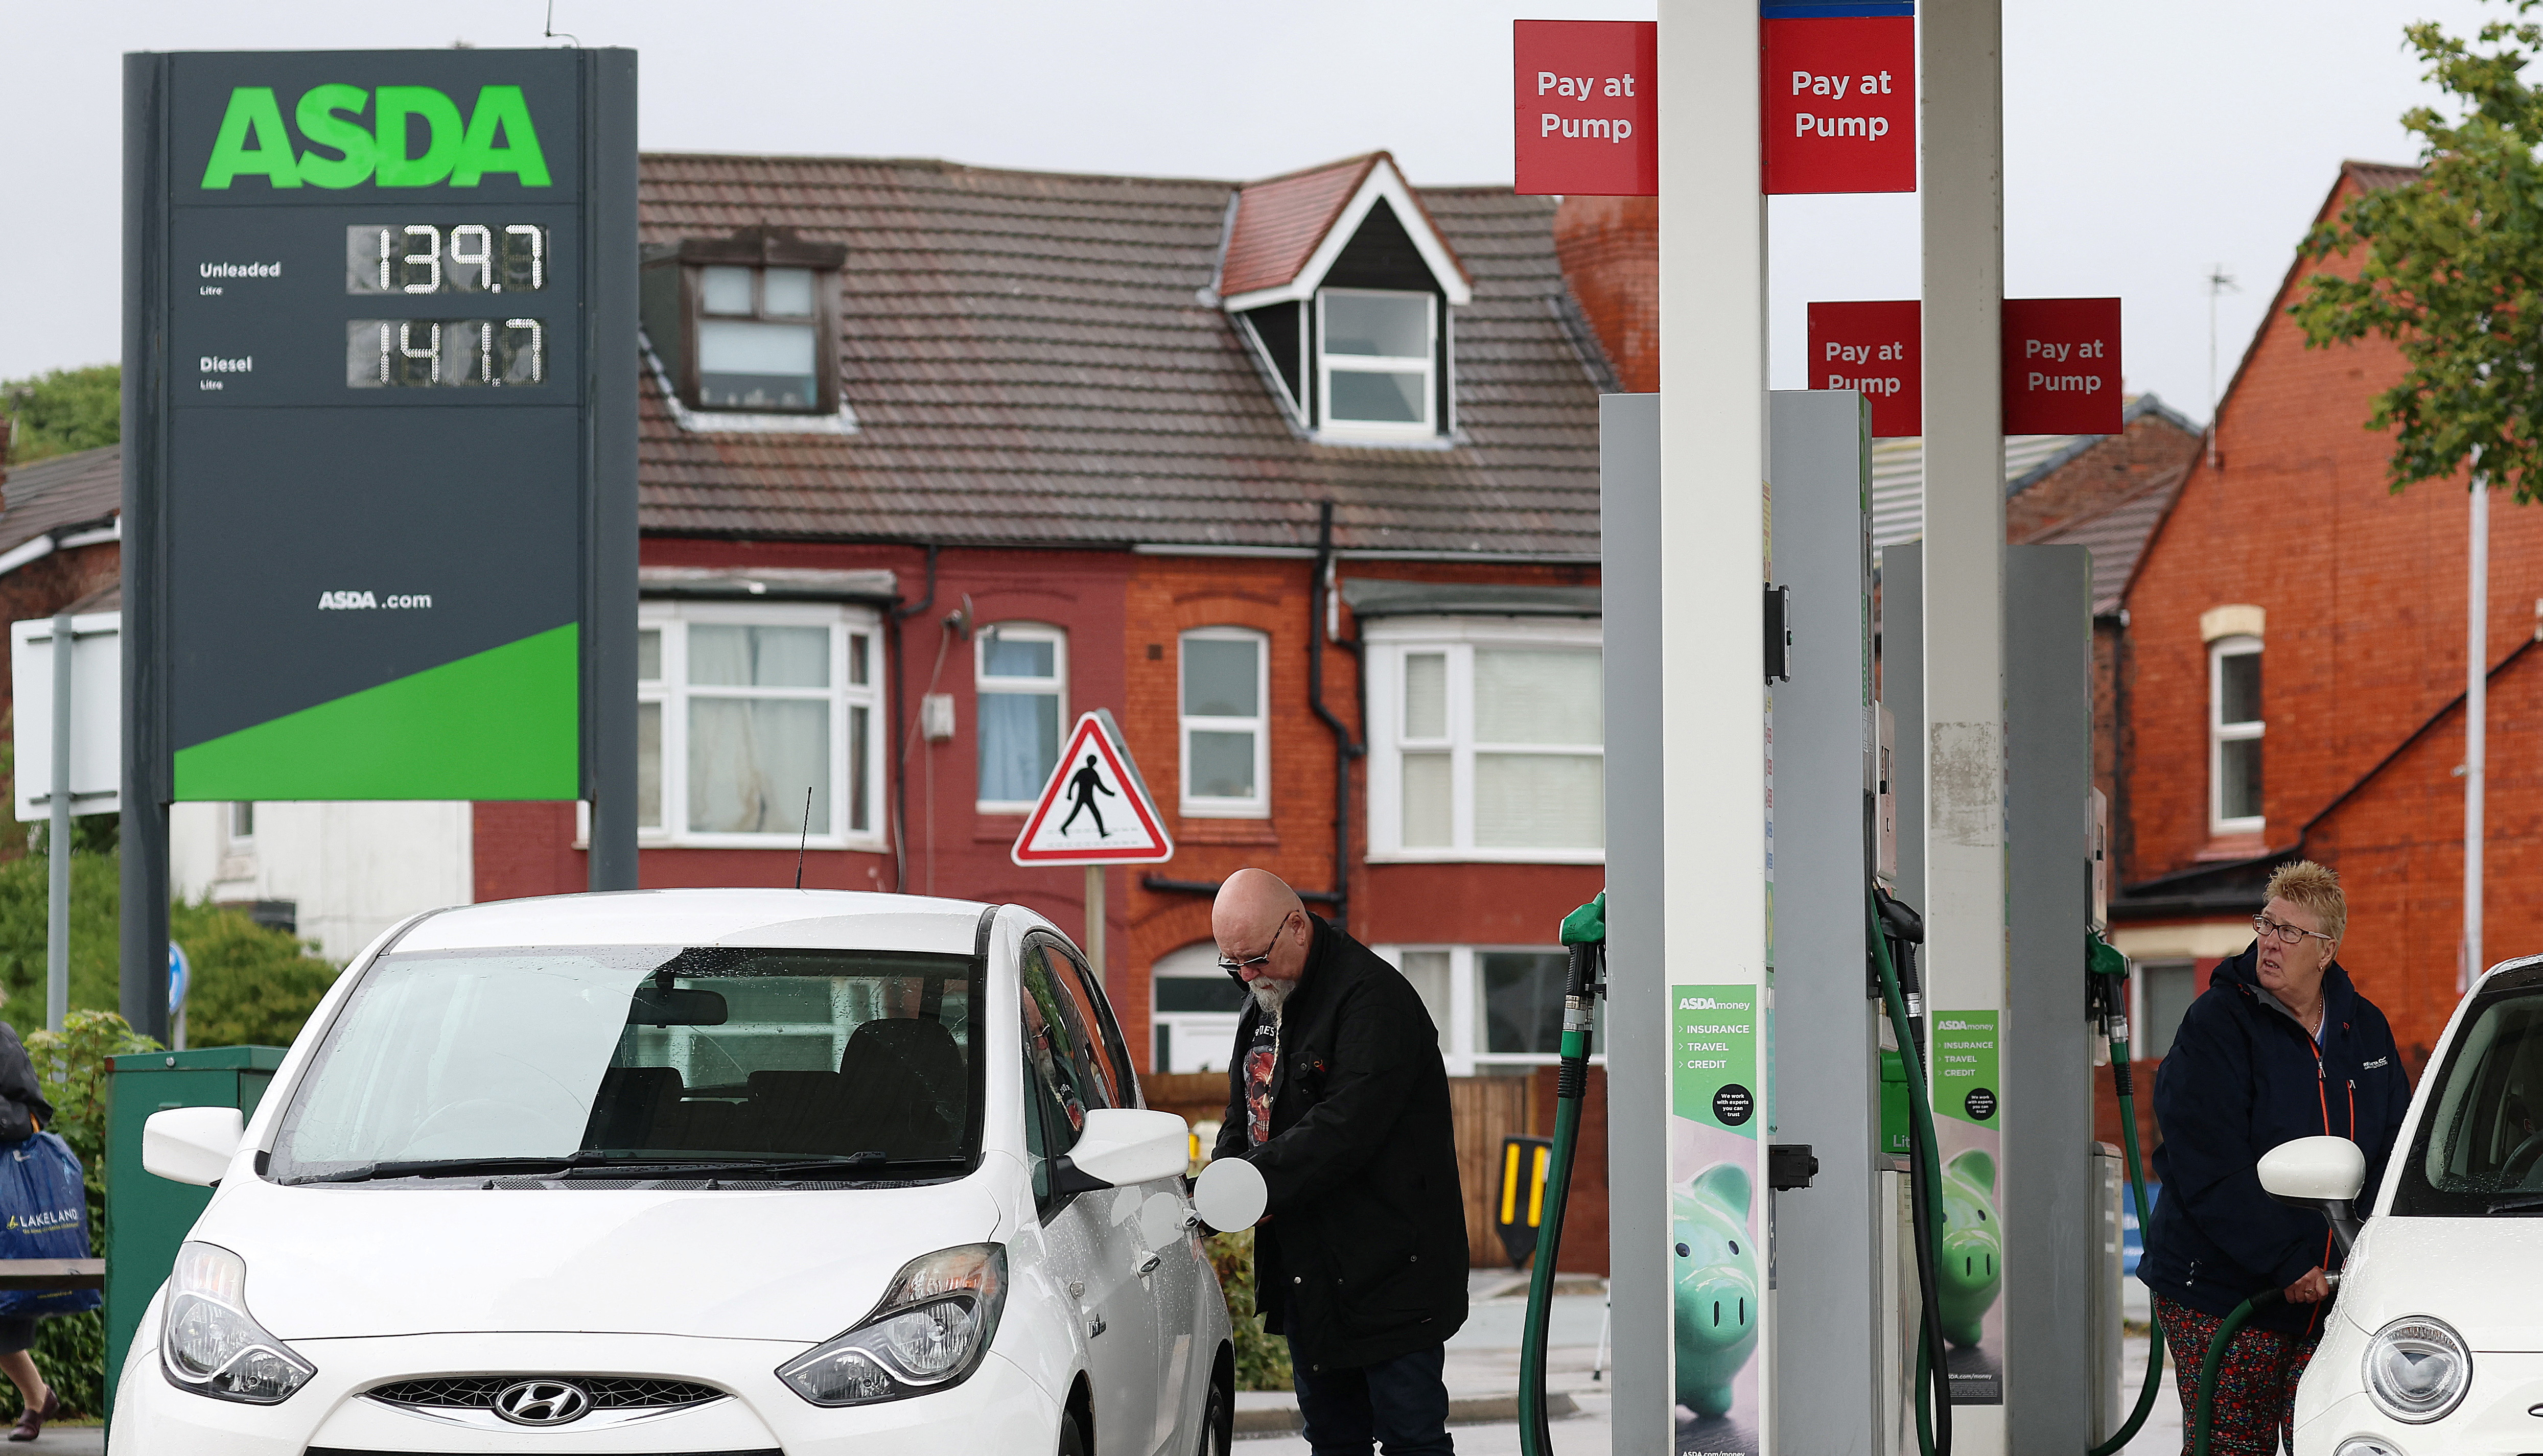 People put fuel in their cars at a filling station at an ASDA supermarket in Birkenhead, Britain